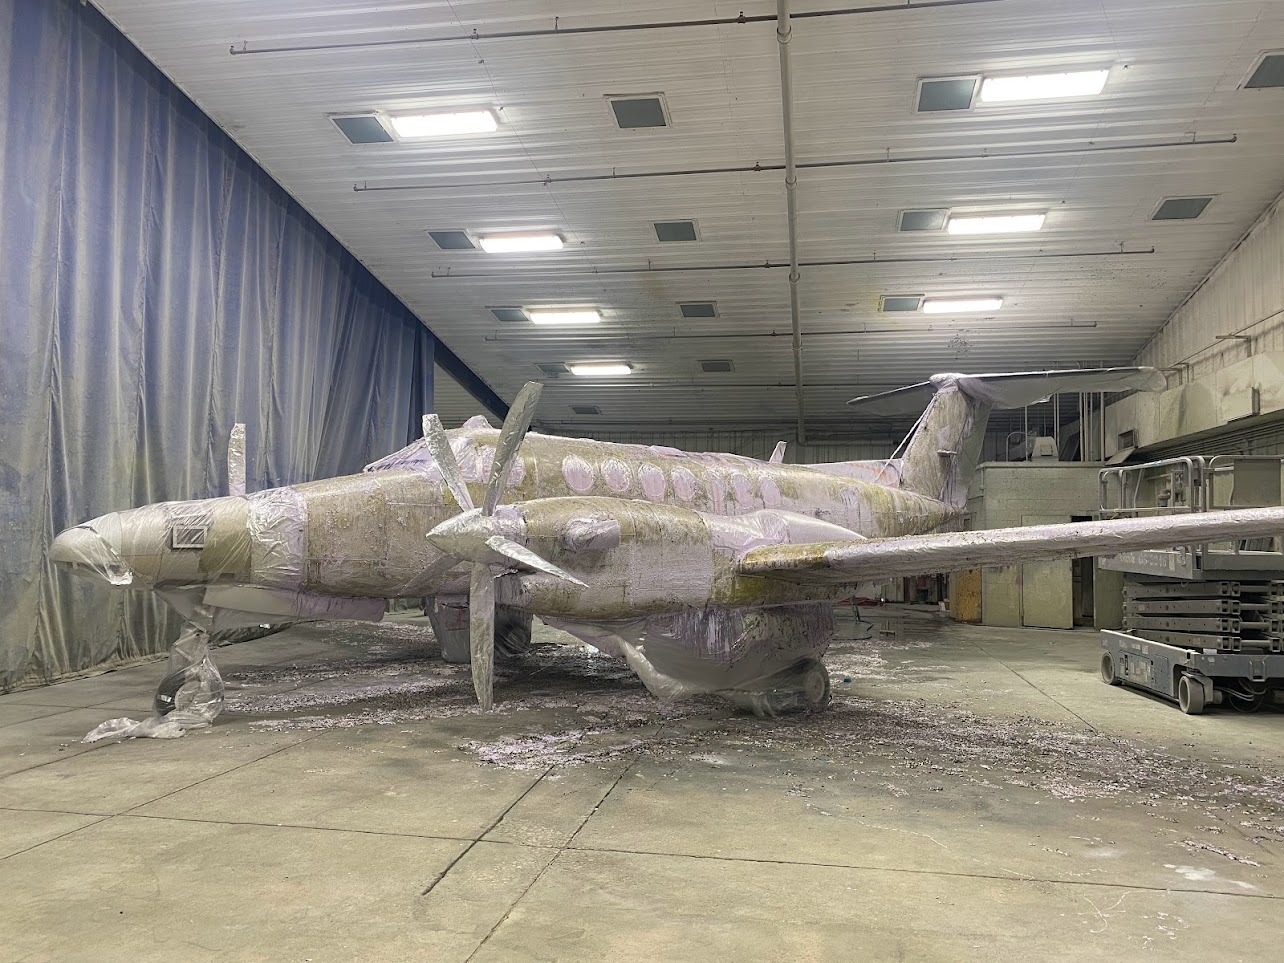 The aircraft in the process of paint removal